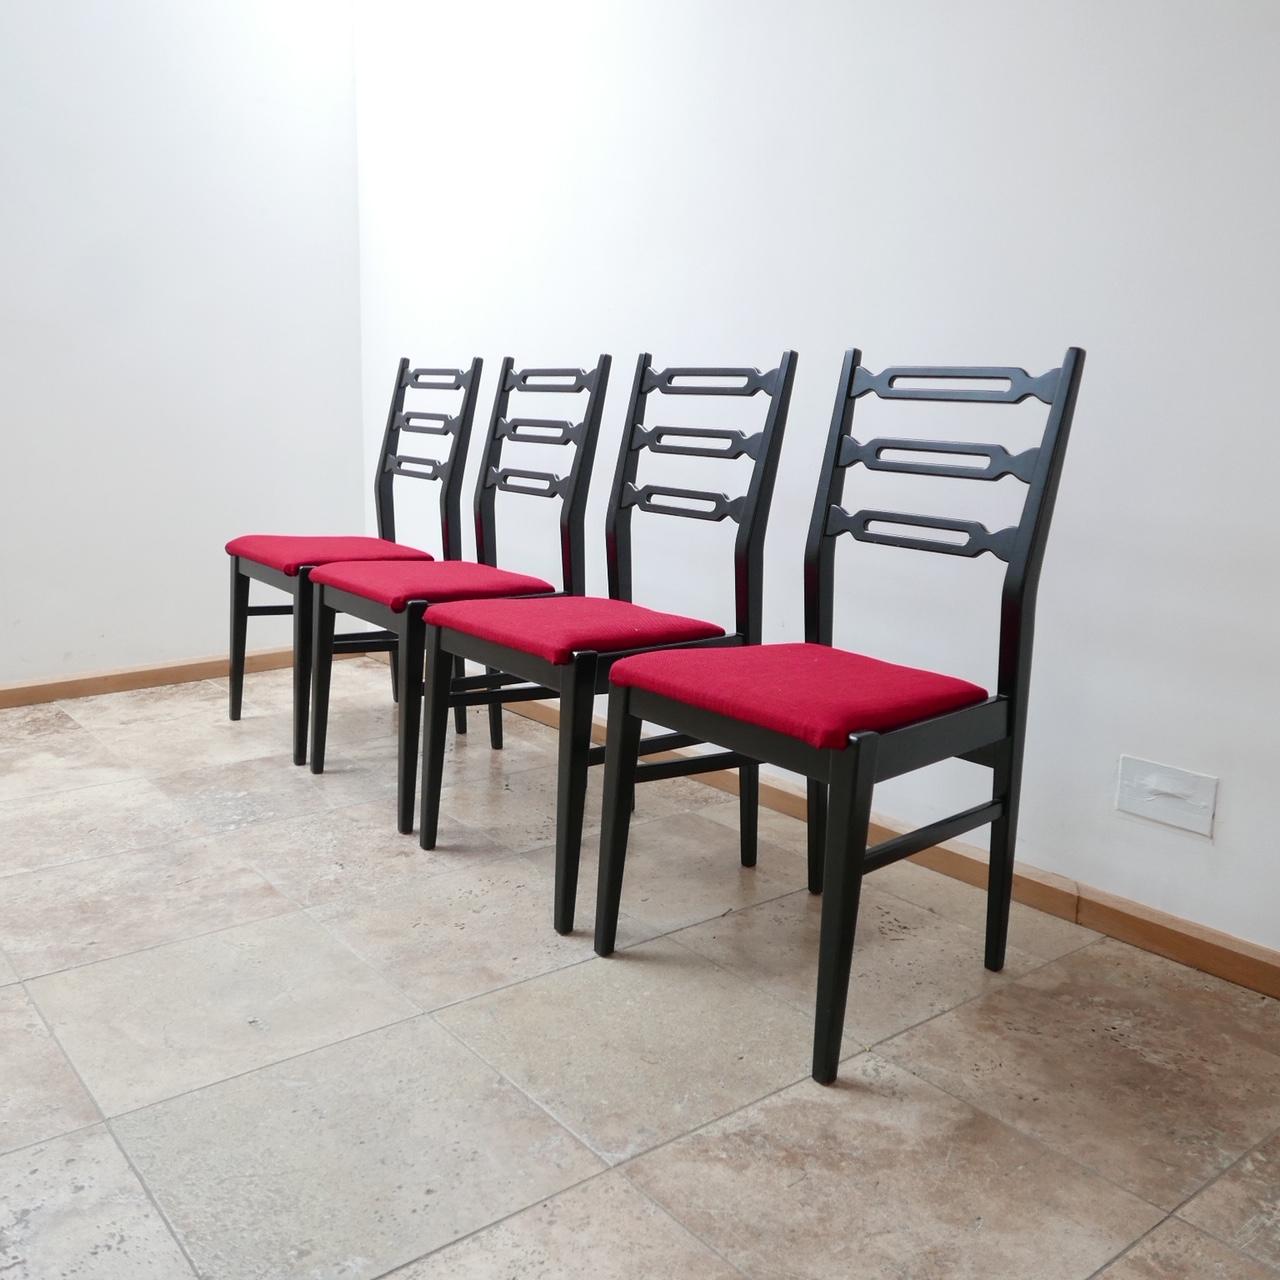 A good looking set of four dining chairs. 

Painted or ebonized wood frames, with some fairly rich upholstery that can be affordably changed on request for a more muted color.

Good condition to the wood and the upholstery. 

Dimensions: 45 W